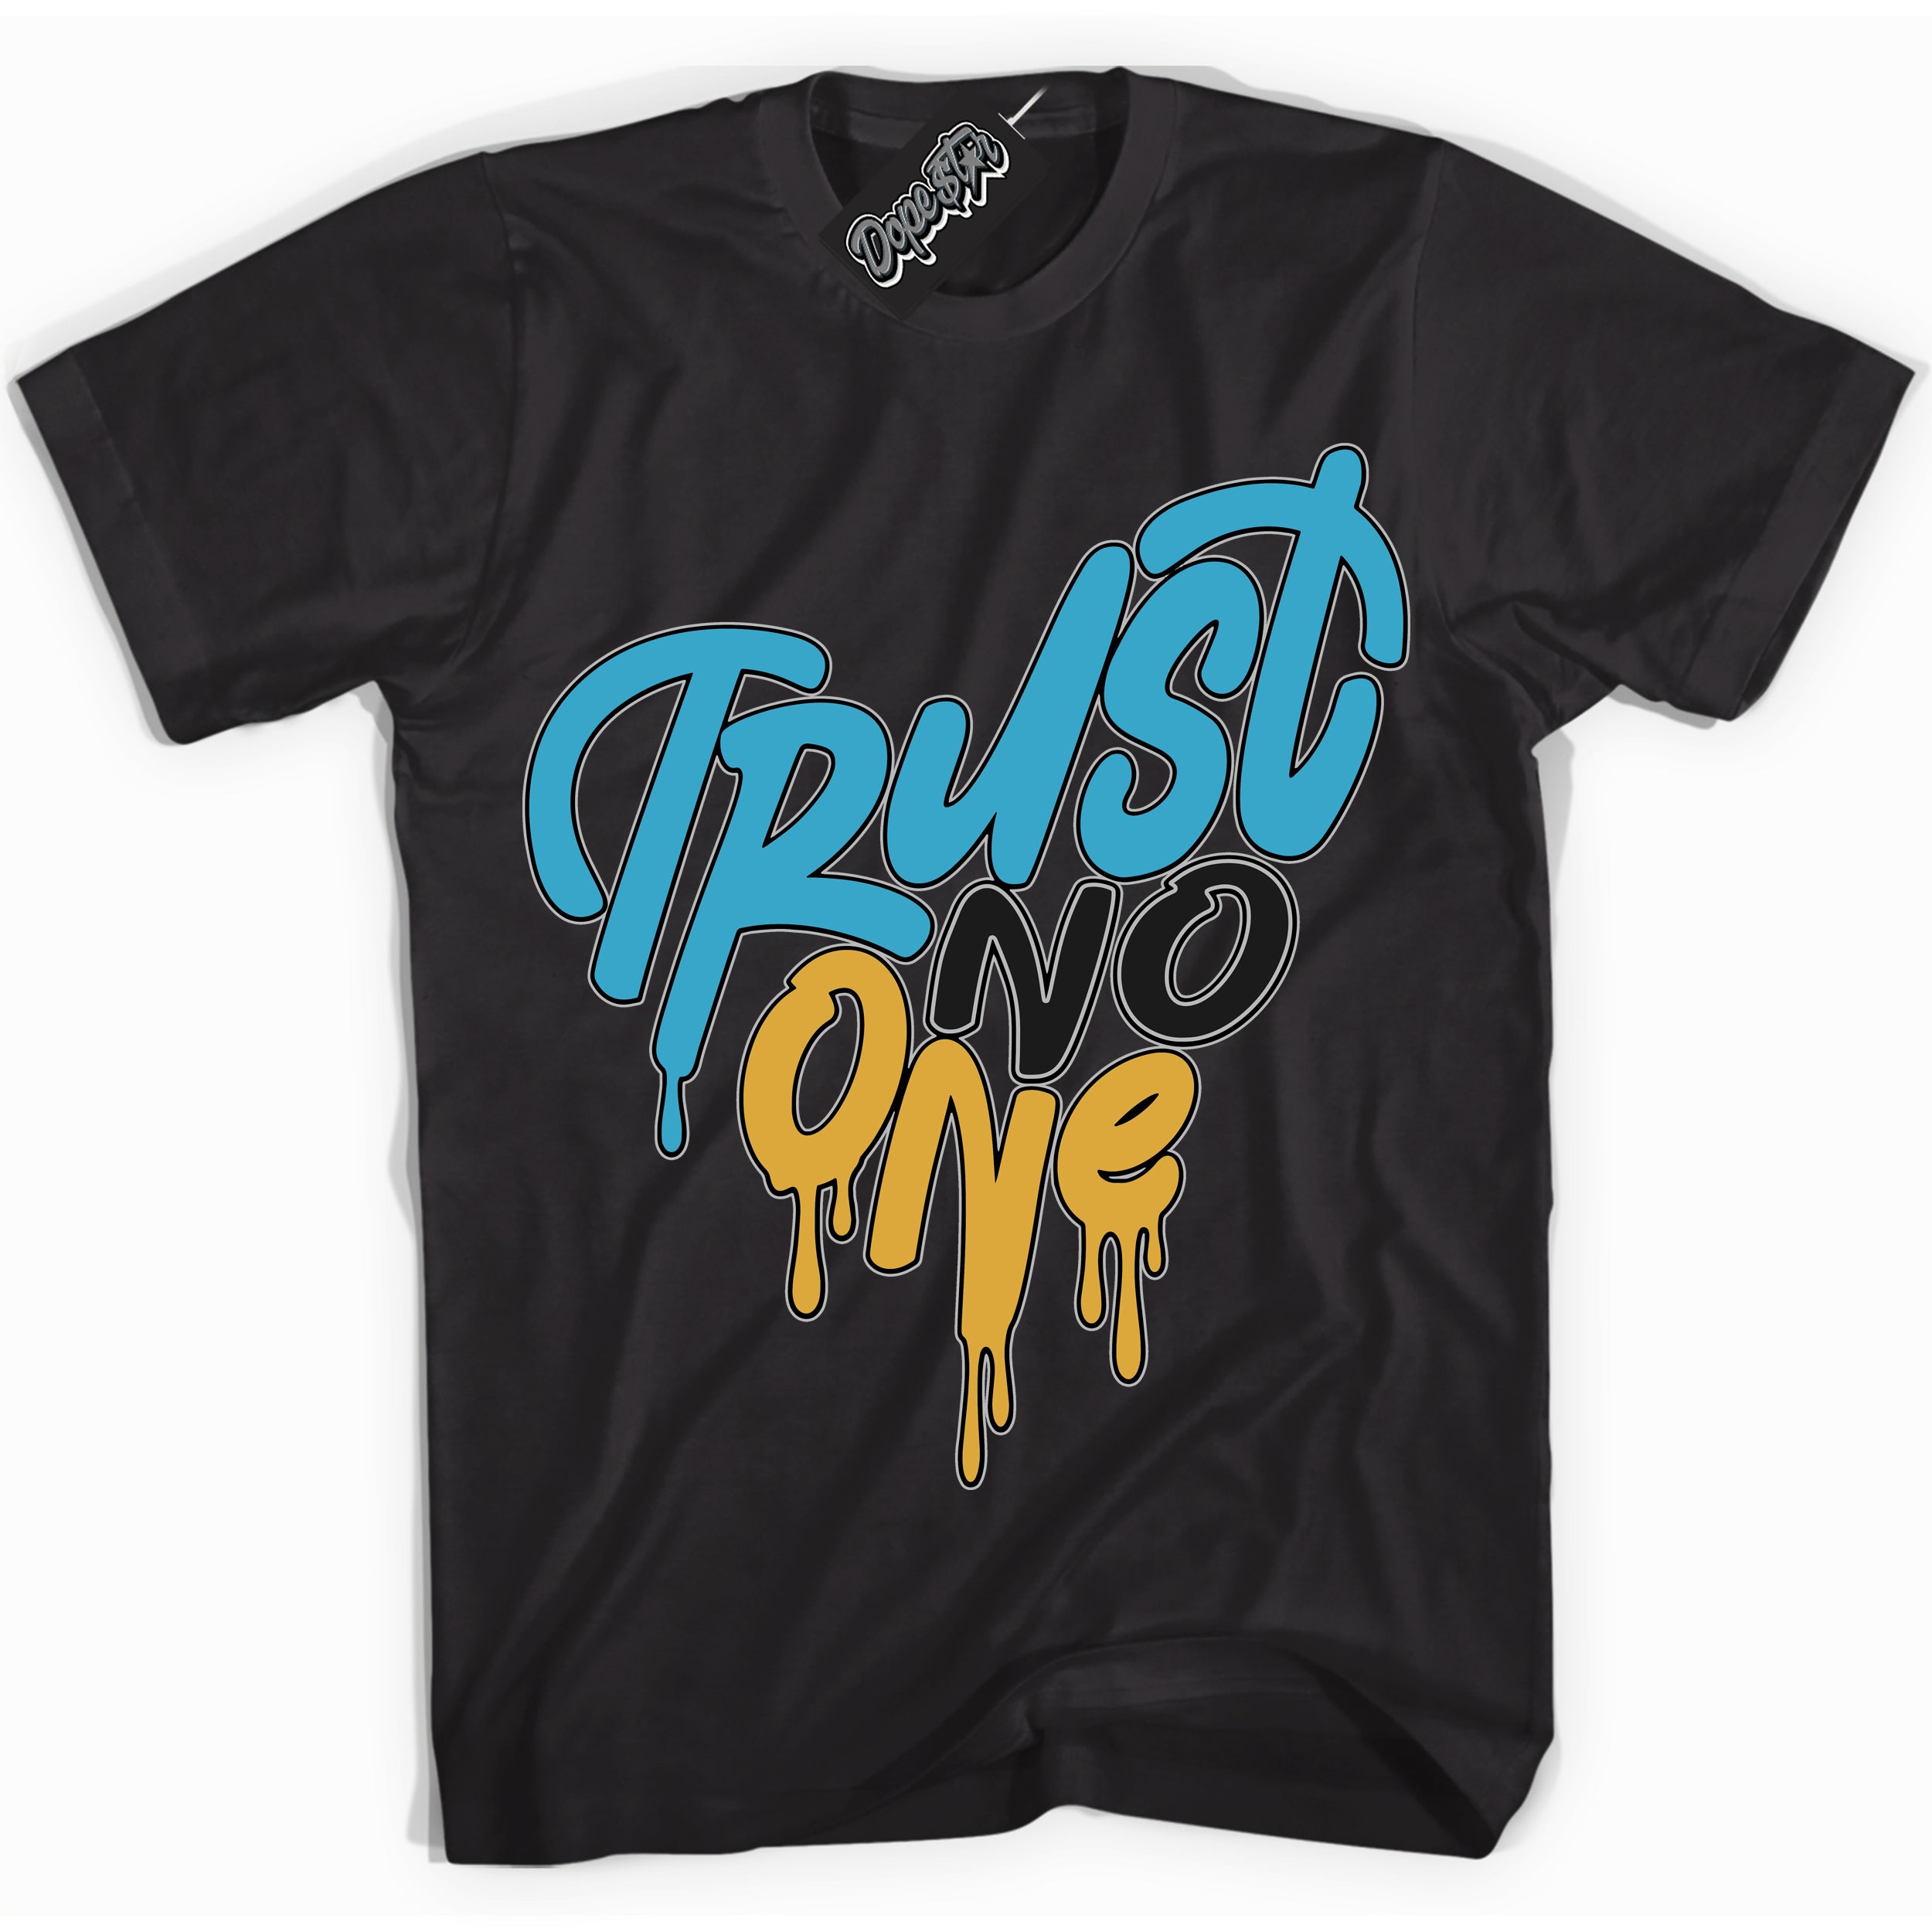 Cool Black Shirt with “ Trust No One Heart” design that perfectly matches Aqua 5s Sneakers.